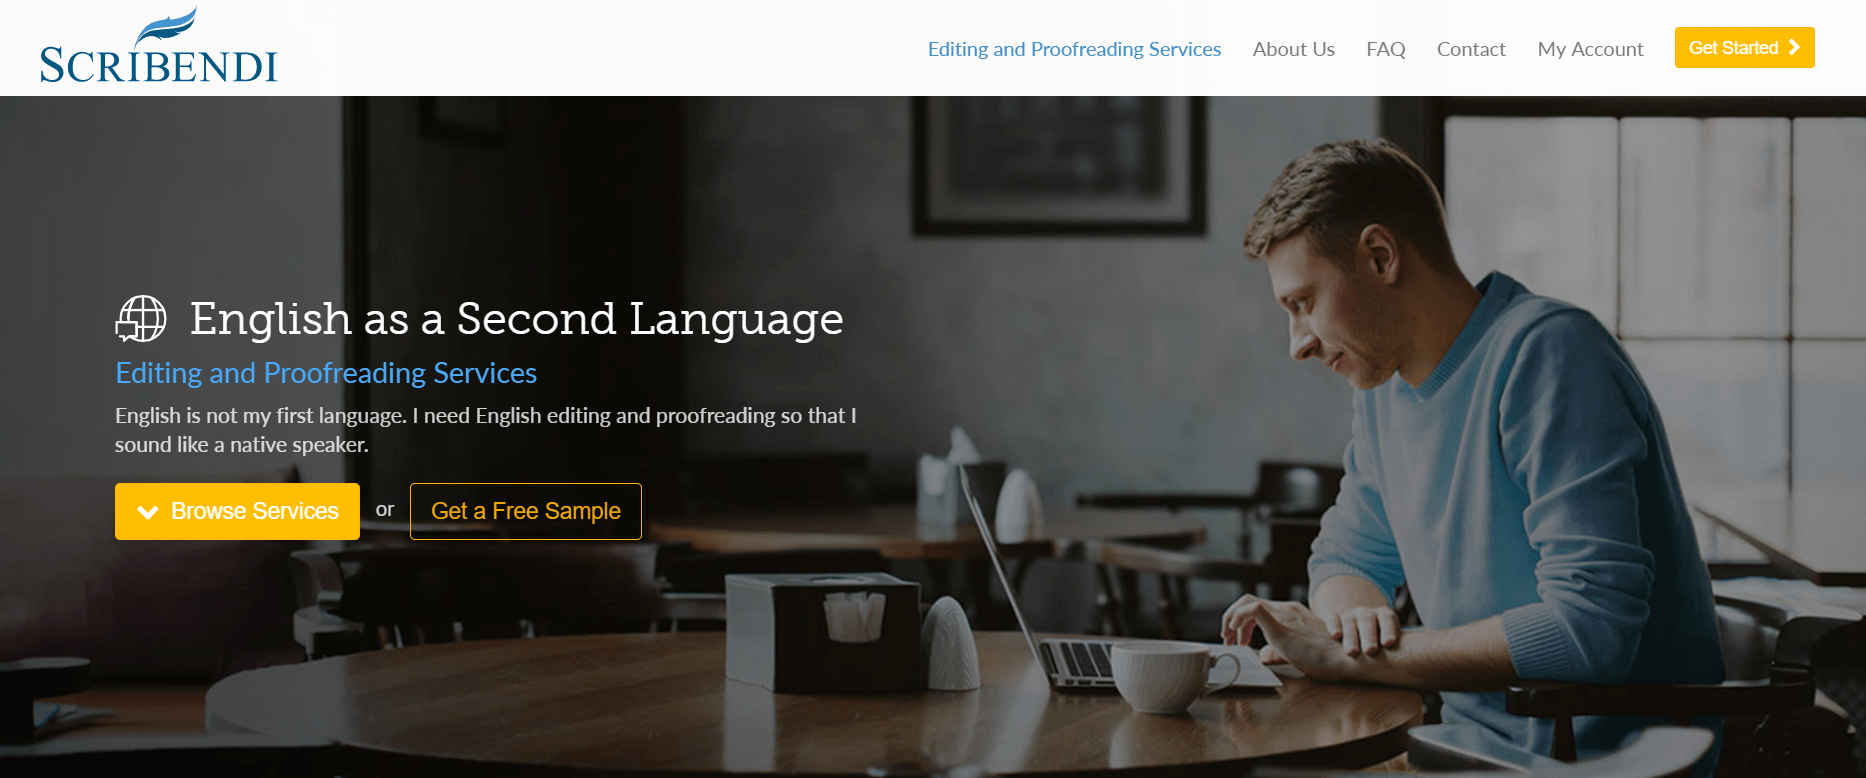 Scribendi Review- English Proofreading Services for ESL Speakers 